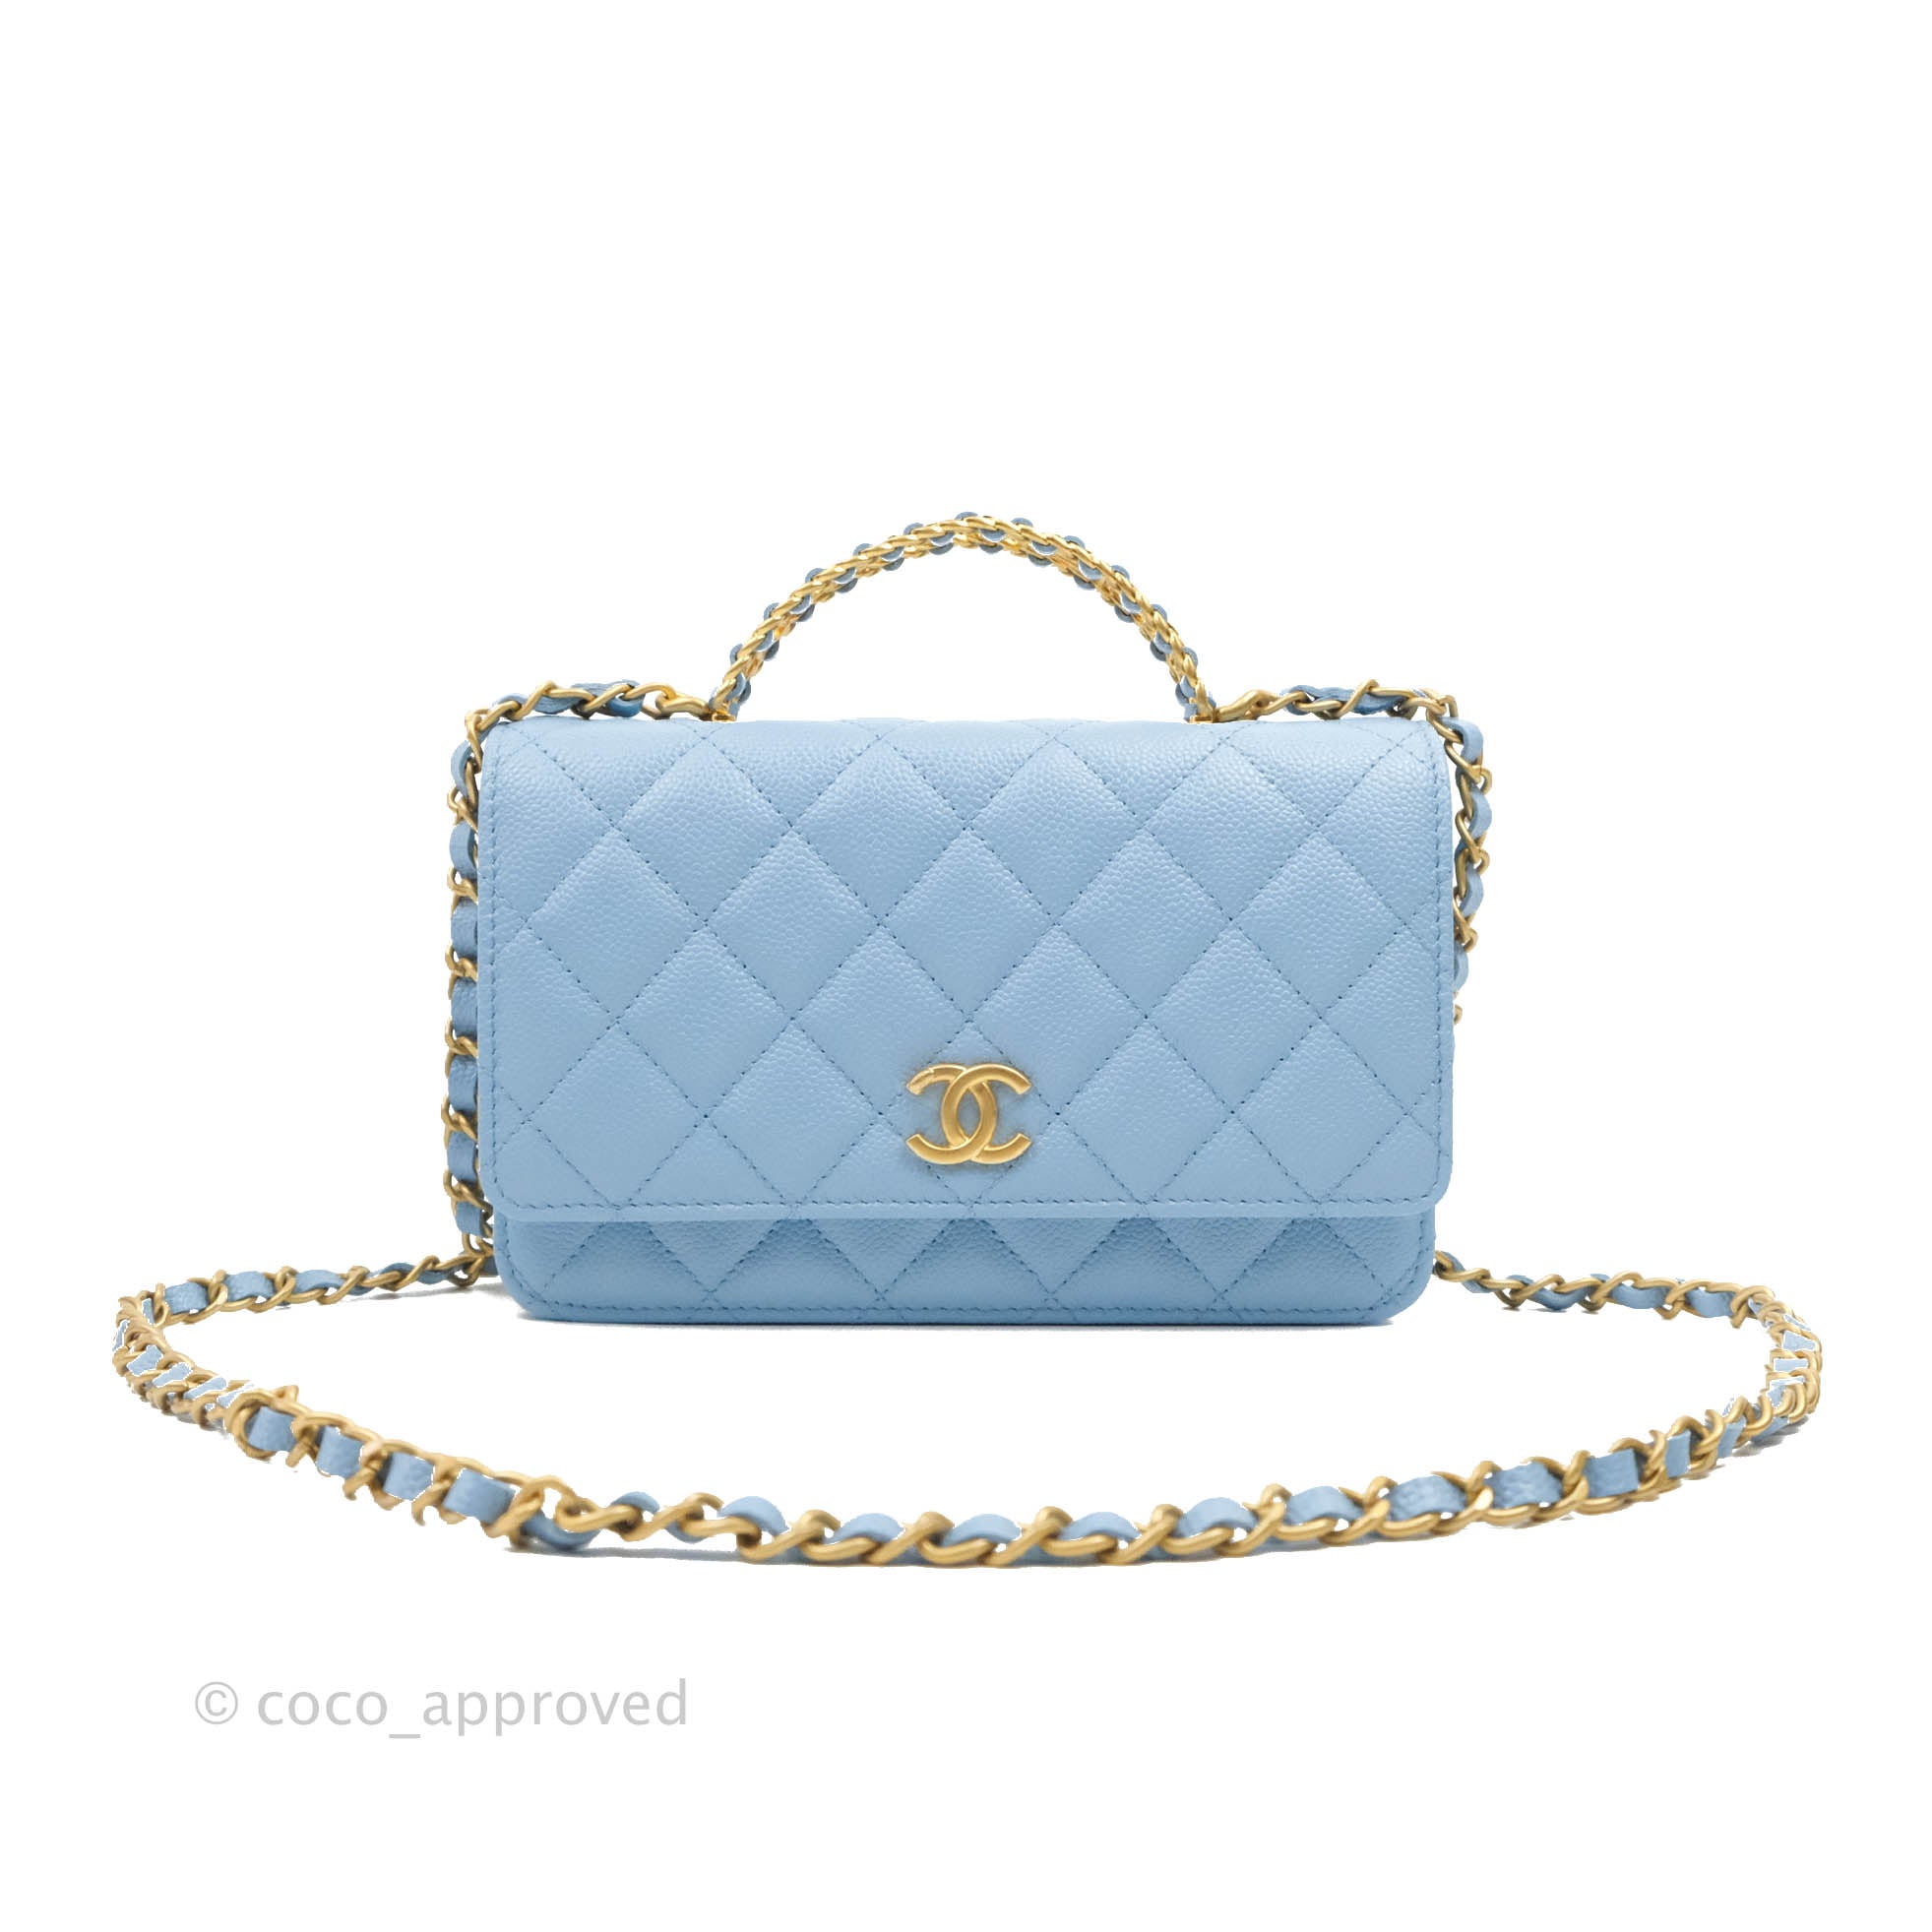 Chanel Blue Metallic Clutch Bag With Handle - Chanel Blue Bag Png